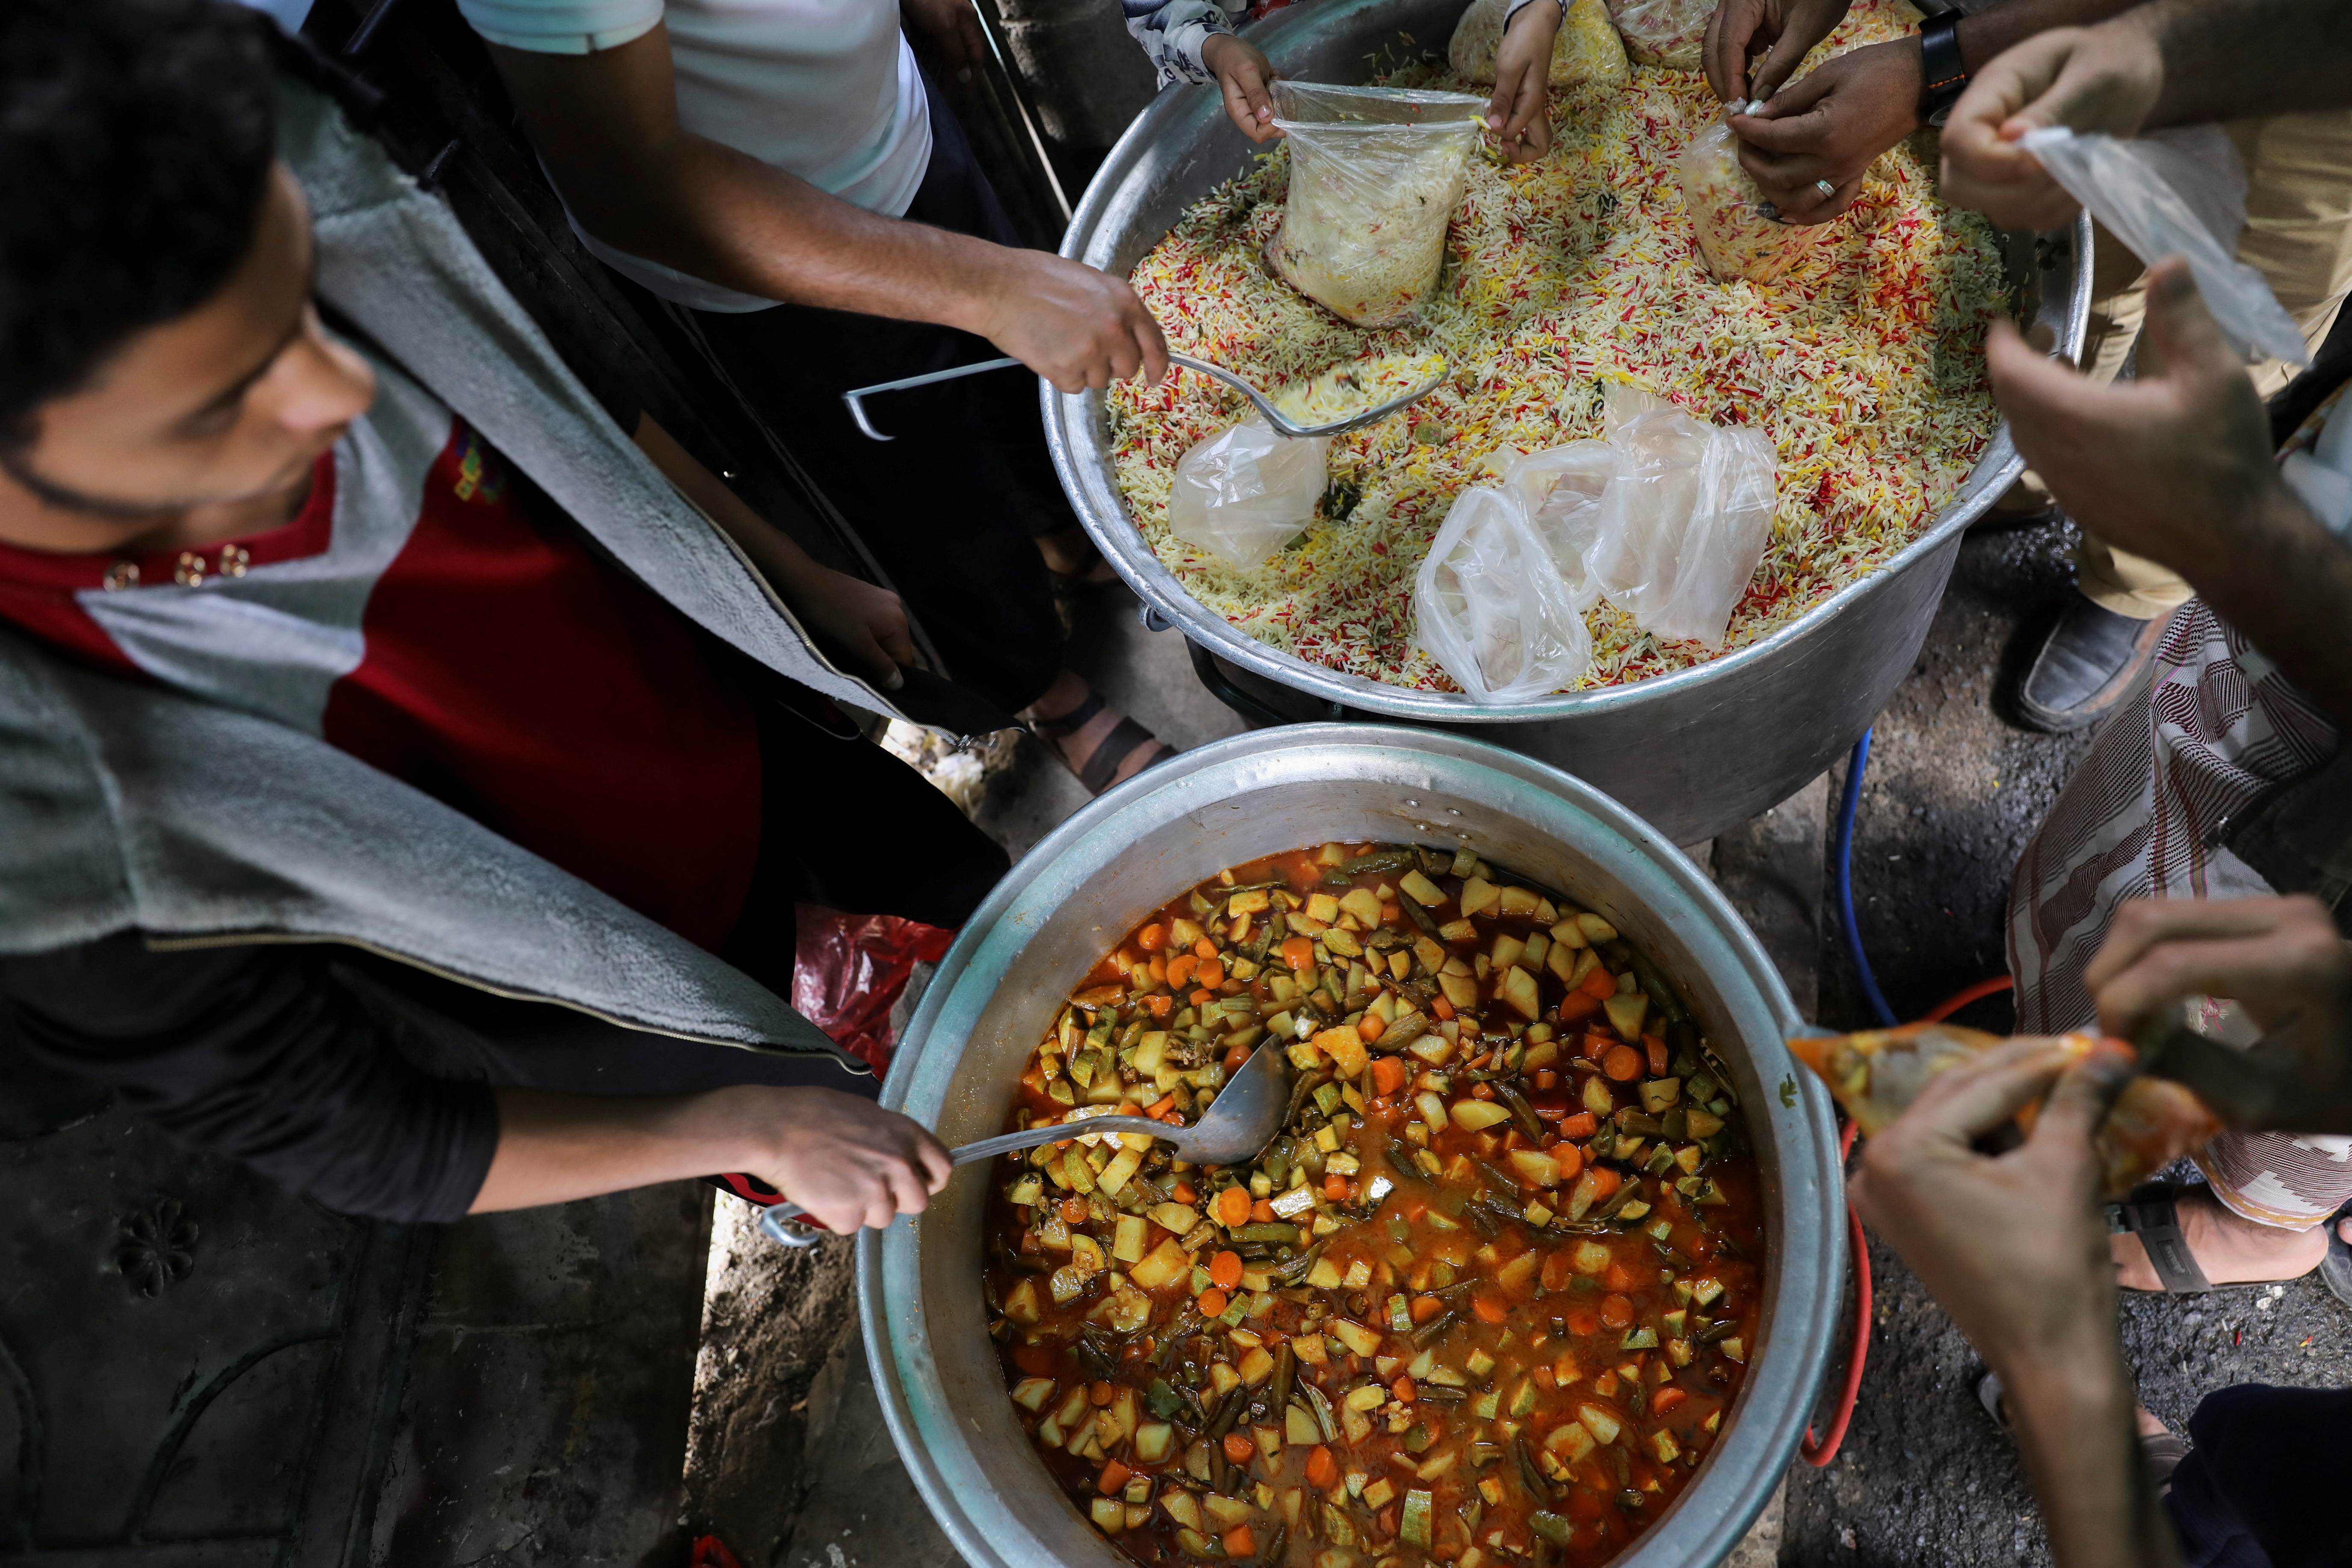 Volunteers prepare meals to be distributed at a charity kitchen during the holy month of Ramadan in Sanaa